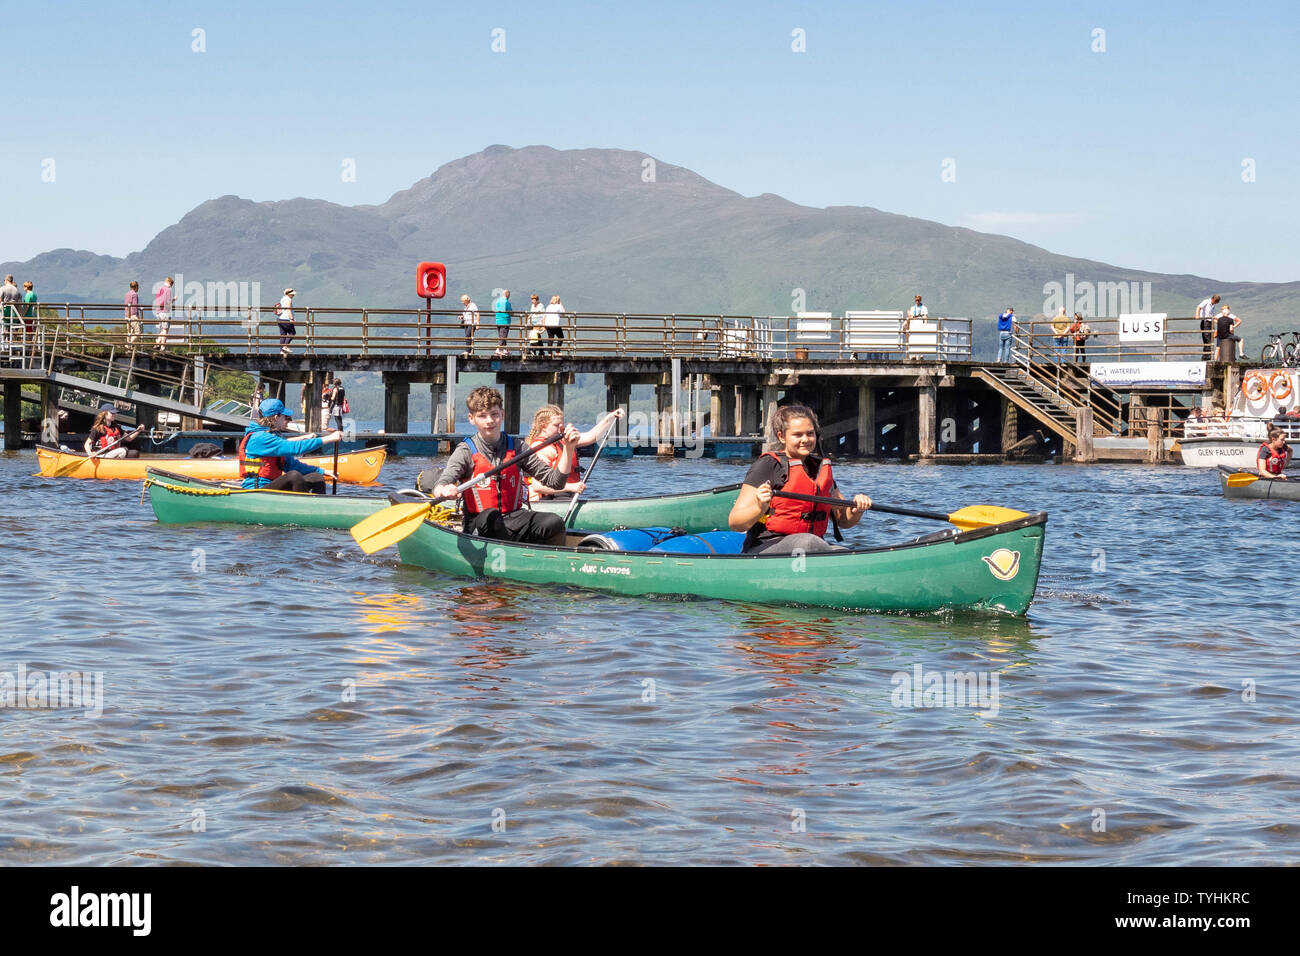 Luss, Loch Lomond, Scotland, UK. 26th June, 2019. UK weather - students from Hillpark Secondary School in Glasgow enjoying brilliant blue skies and bright sunshine this afternoon as they leave the village of Luss paddling on Loch Lomond for their Duke of Edinburgh silver expedition. Credit: Kay Roxby/Alamy Live News Stock Photo